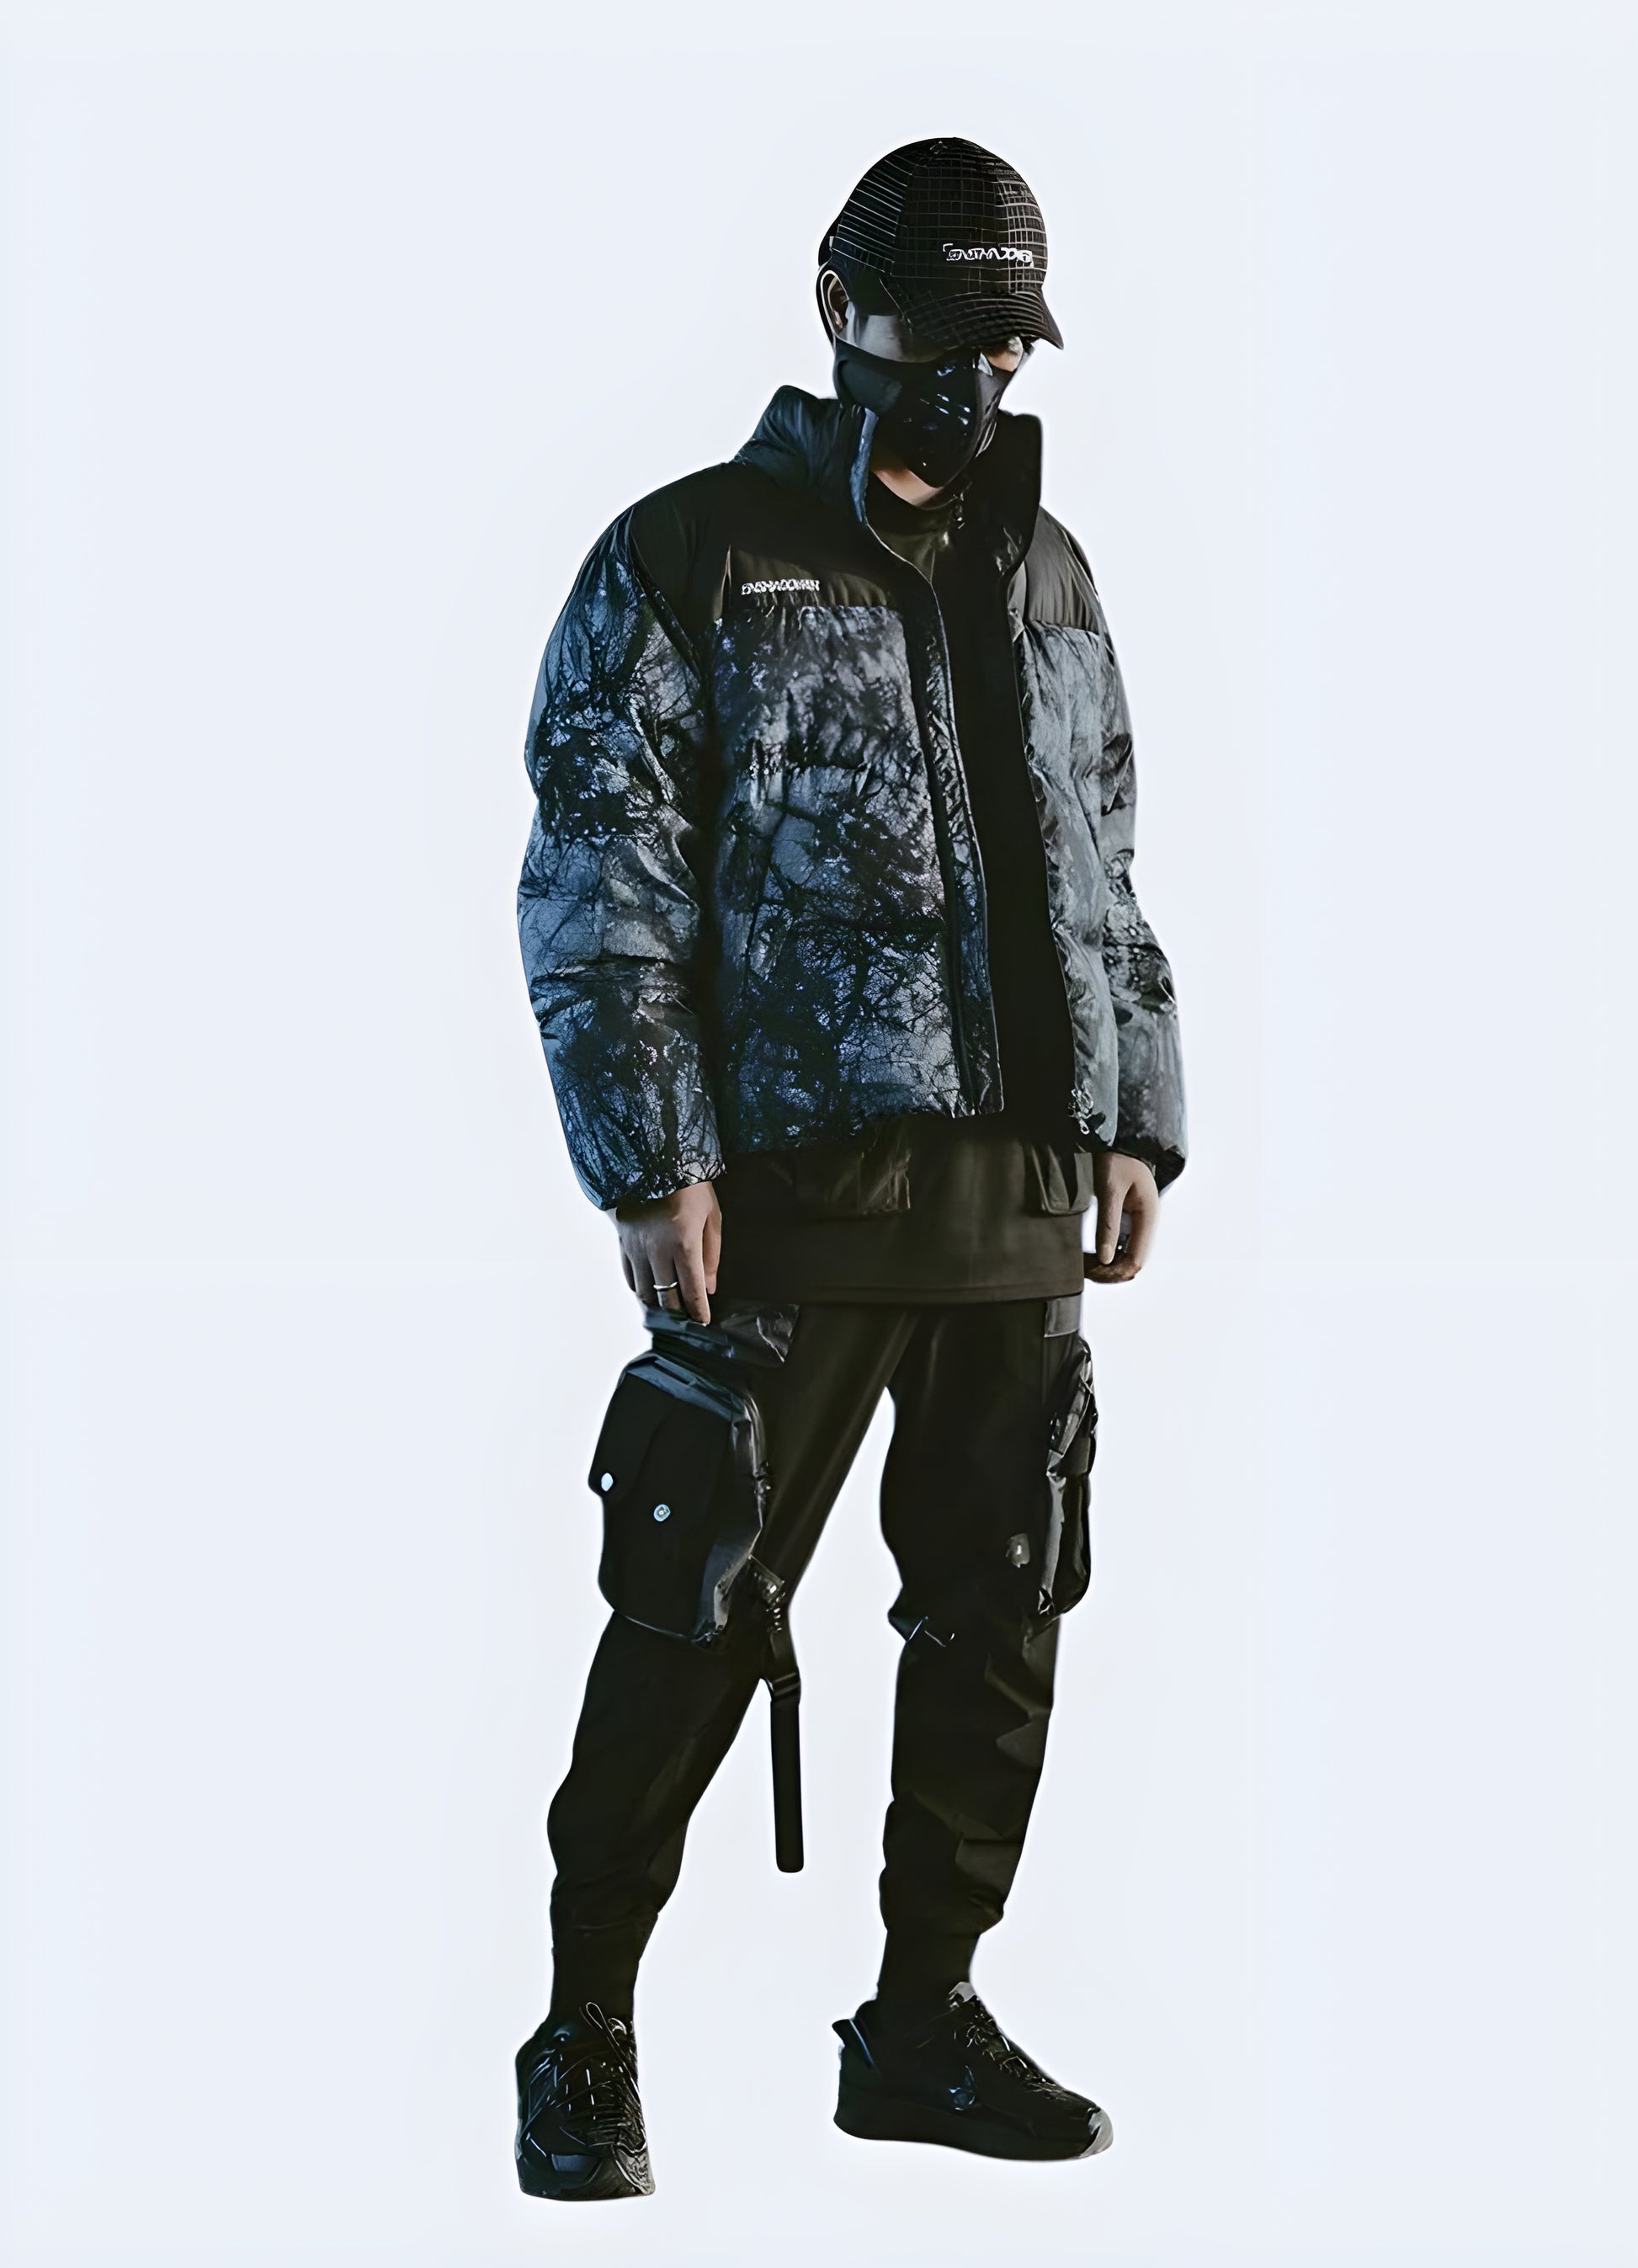 Demonstrating the techwear puffer jacket's versatility in accommodating various body types.